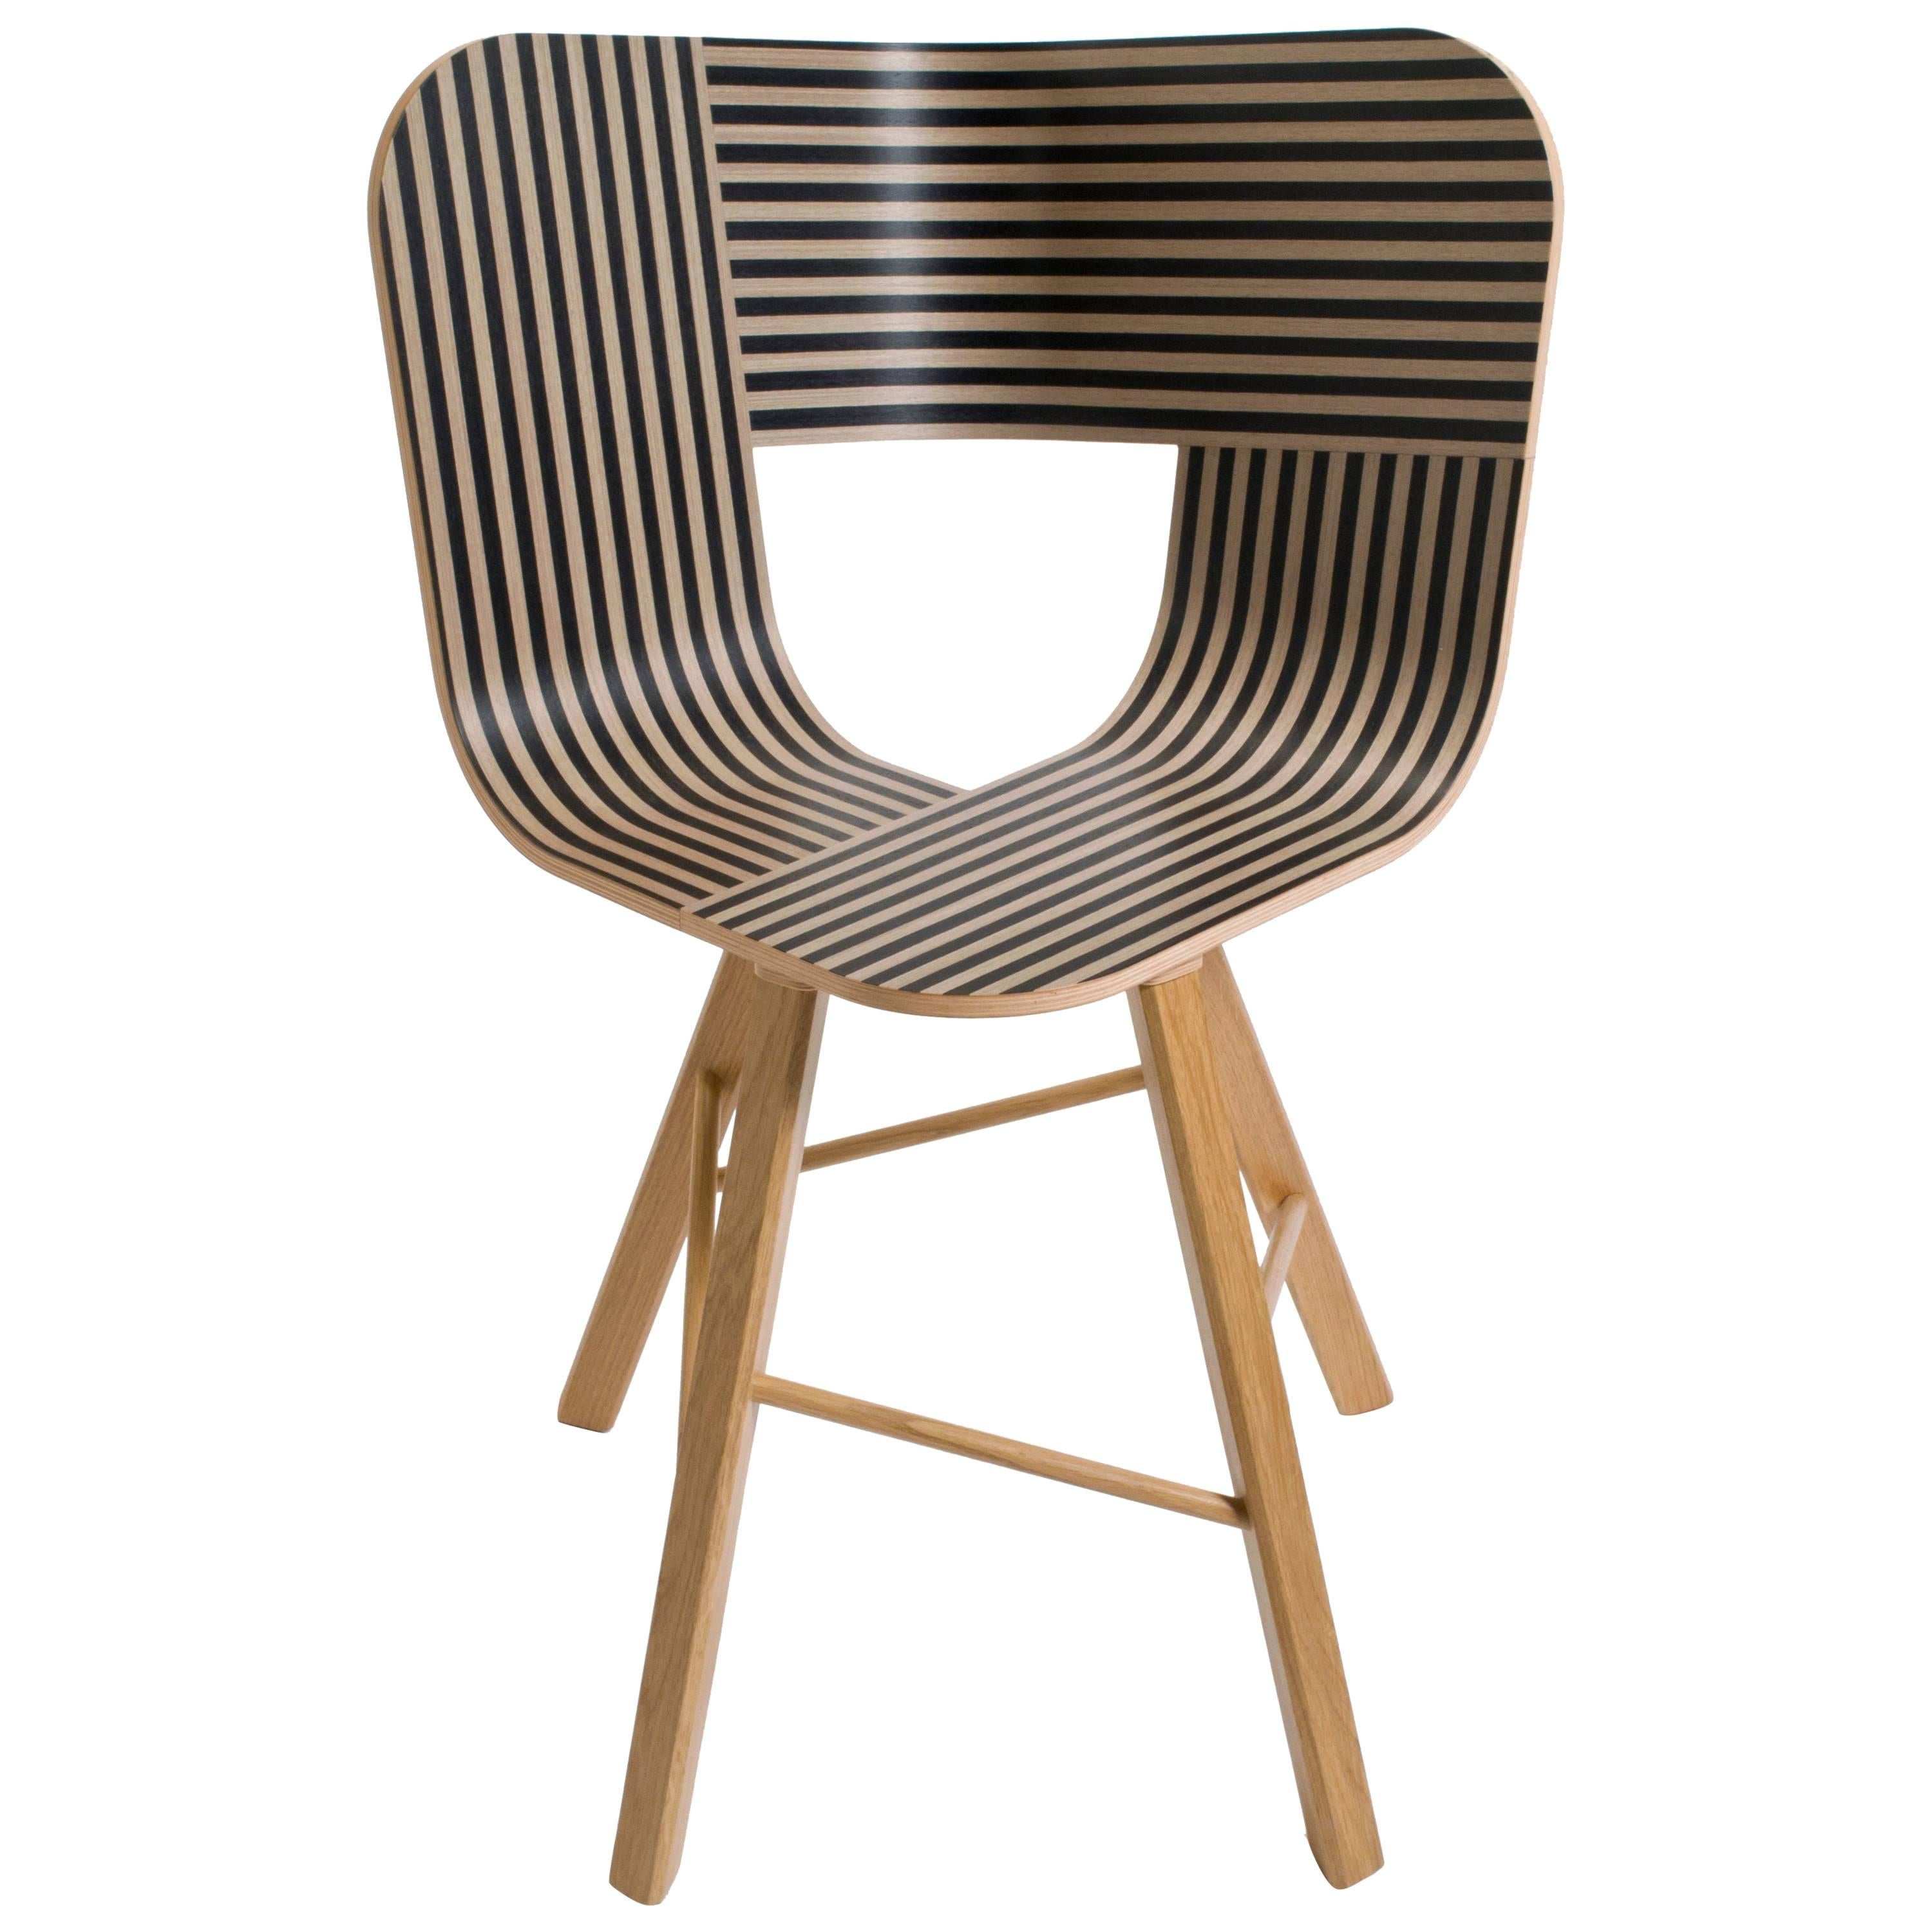 Tria Wood 4 Chair, Stripes Veneered Coat; Design Icon Inspired to Graphic Art